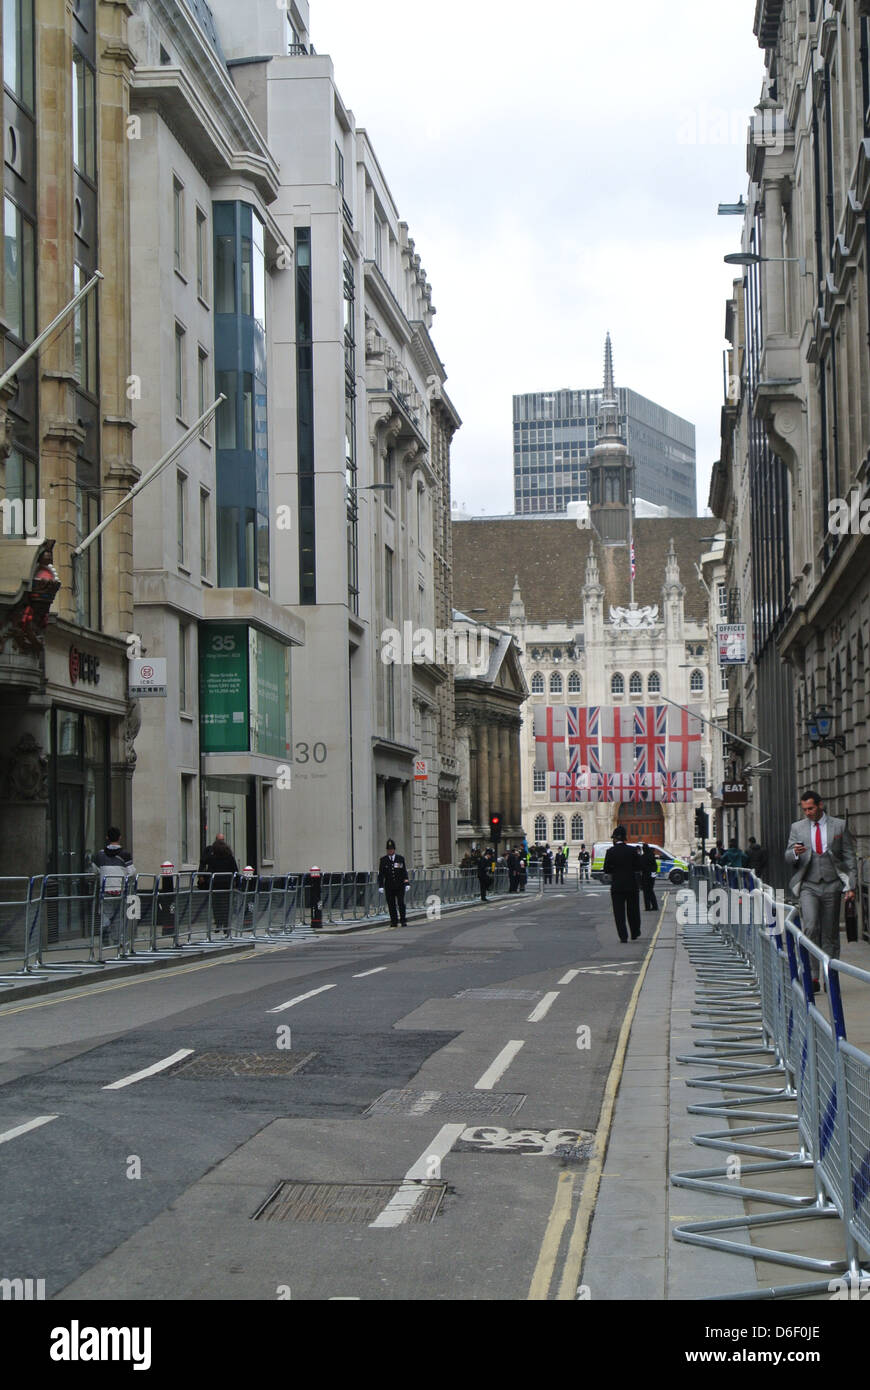 Empty roads, no traffic. Day of Margaret Thatchers funeral. London. English flags, British Flags, policeman. Barriers. Stock Photo